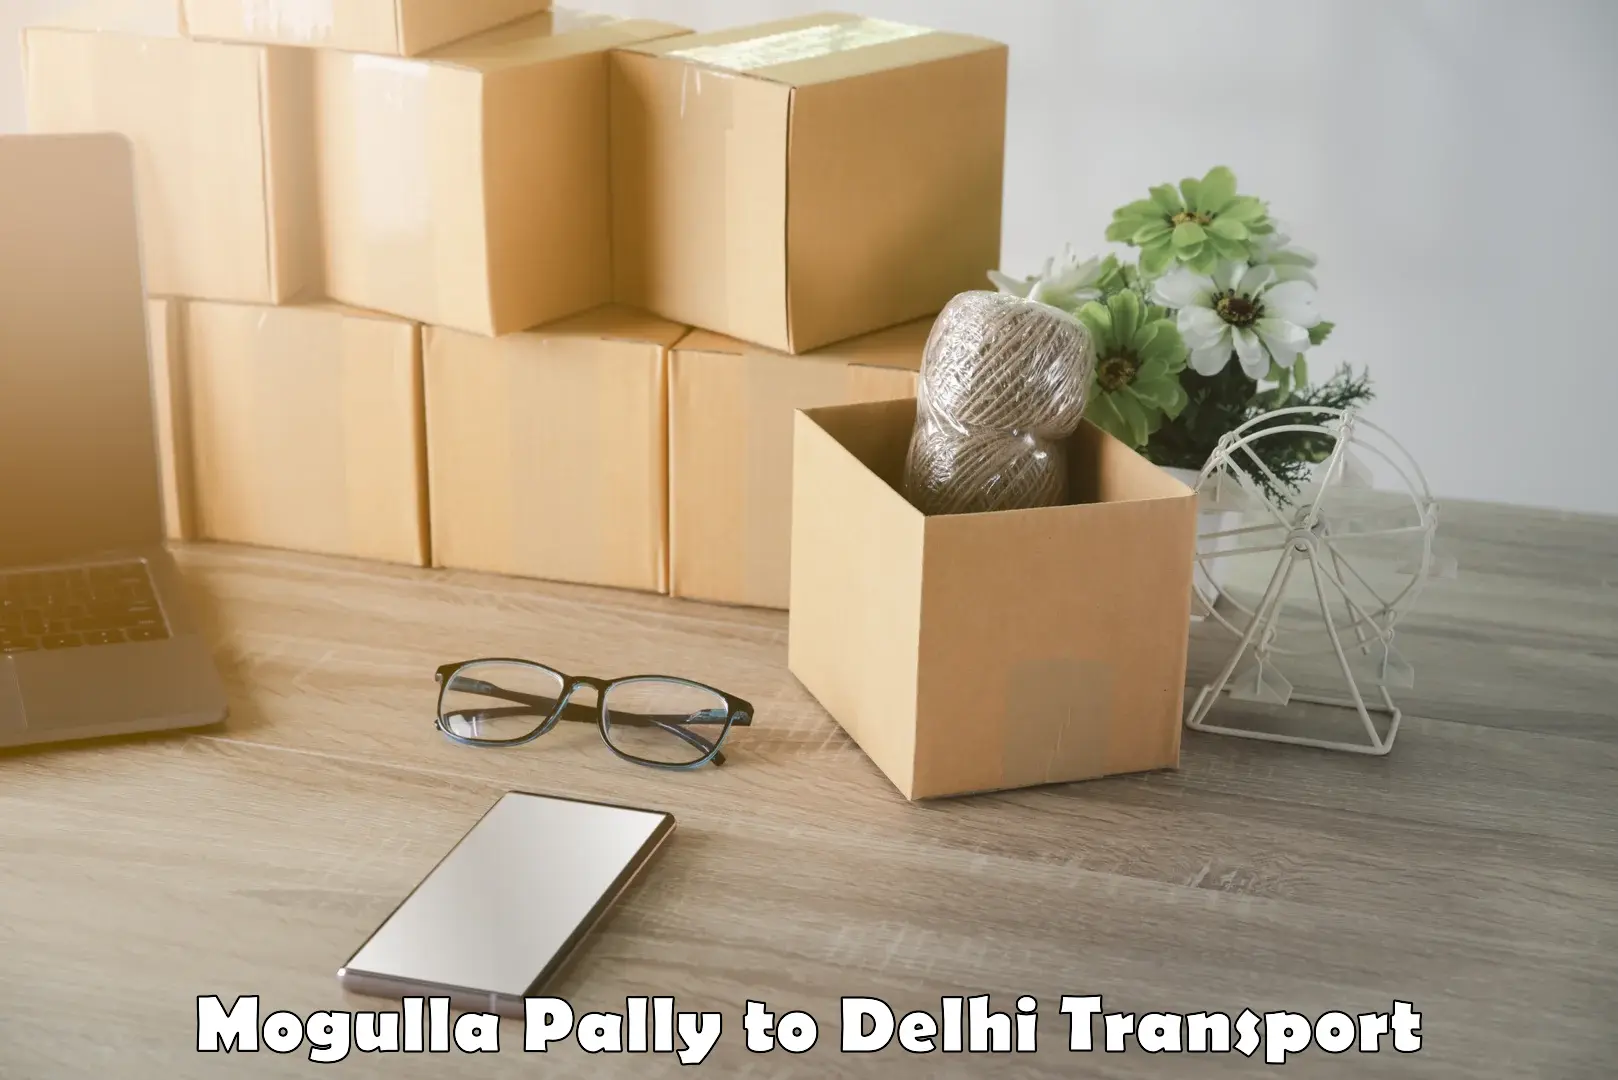 Parcel transport services in Mogulla Pally to NCR